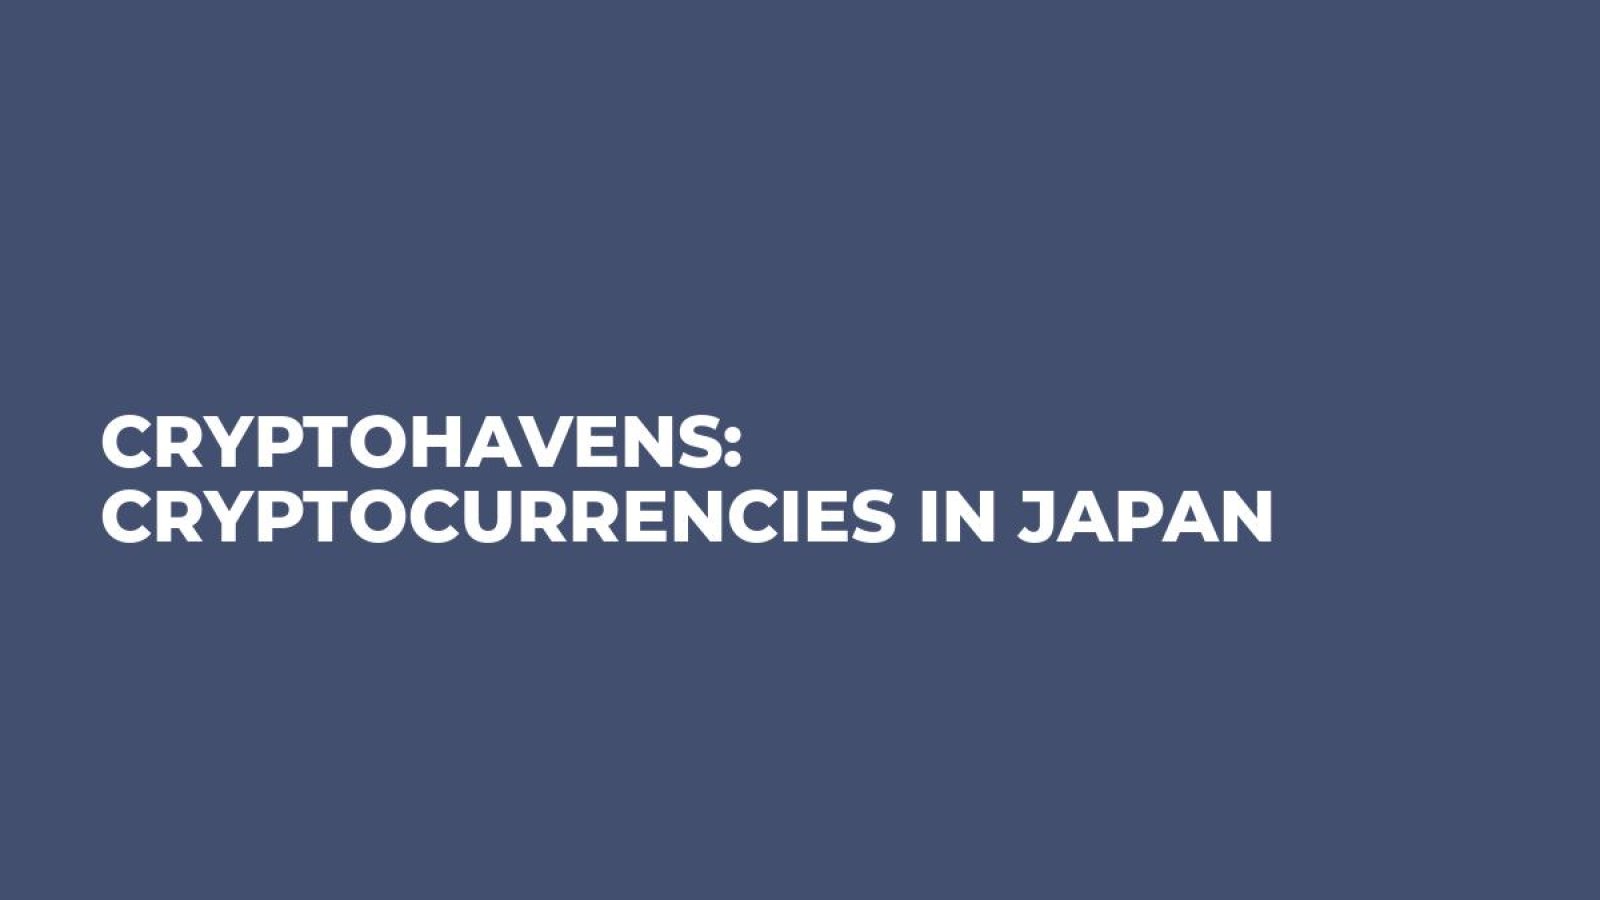 CryptoHavens: Cryptocurrencies in Japan